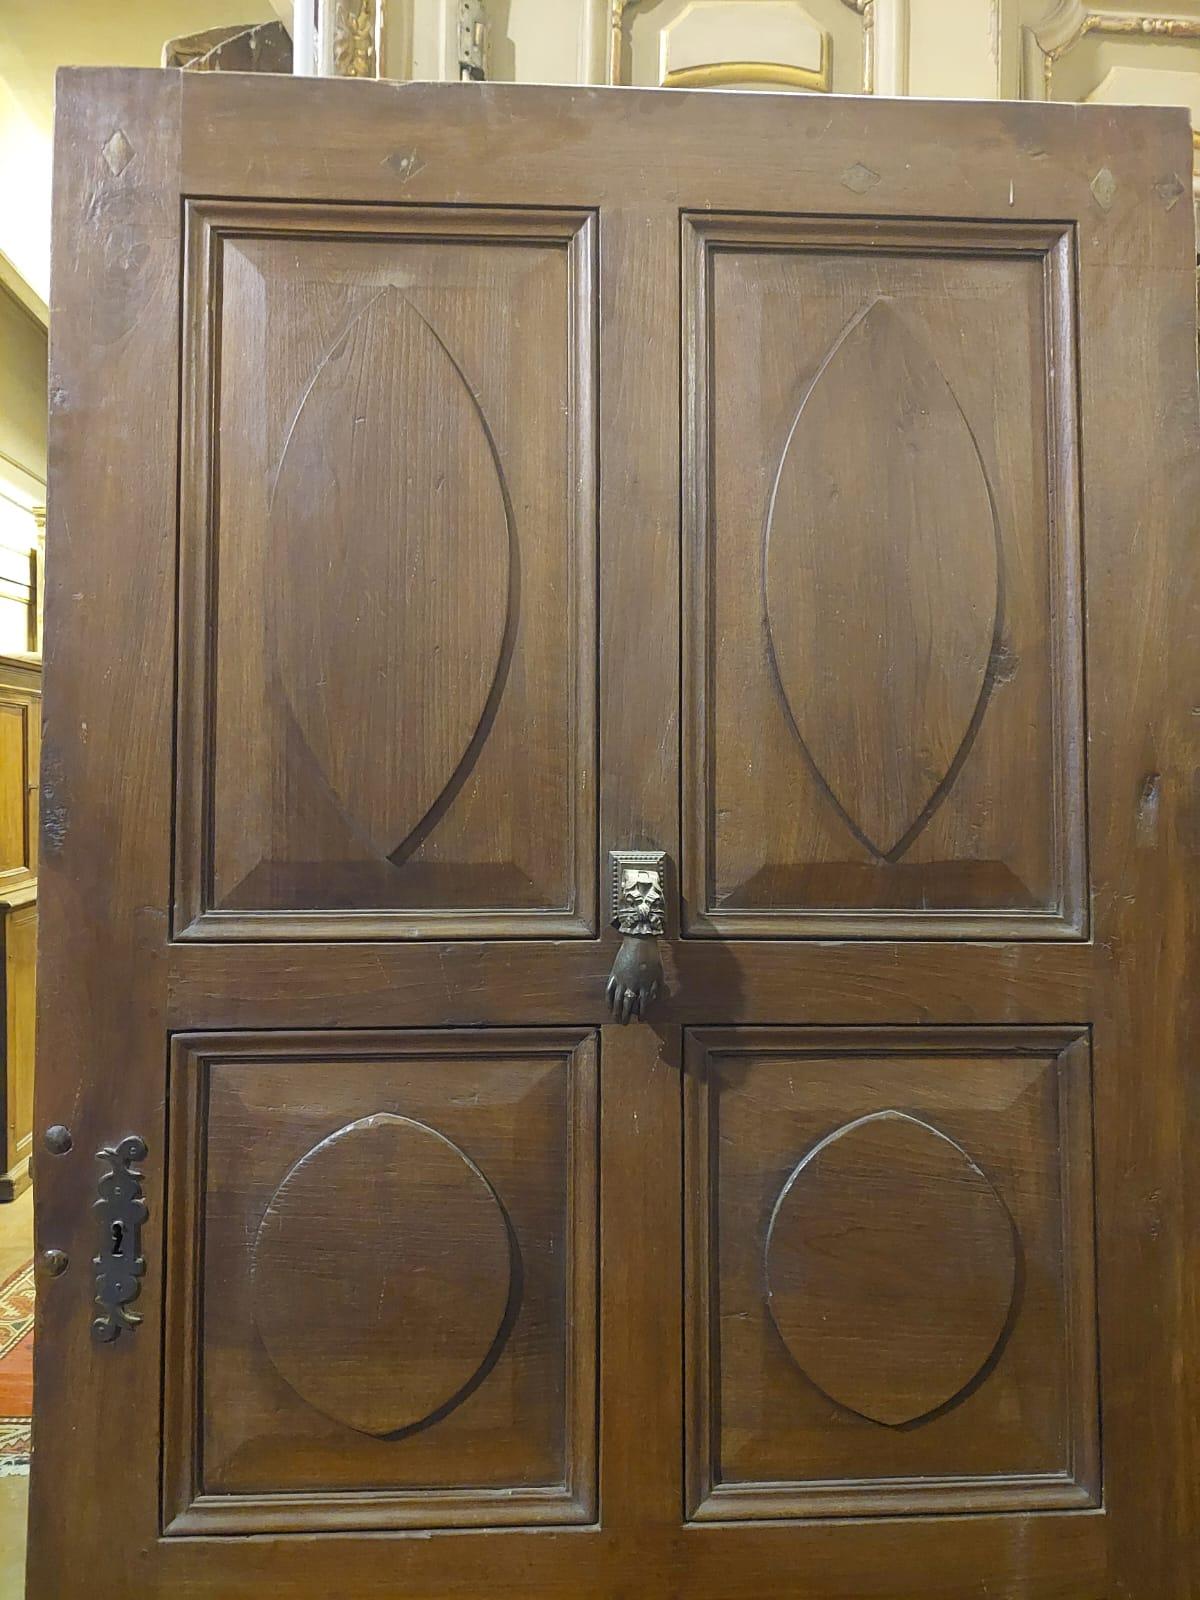 Antique entrance door, one-leaf main door, in hand-carved walnut with almond-shaped tiles typical of the time, hand-built in the first half of the 19th century for the entrance to a building in the historic center of Piedmont (Italy).
Ideal for a